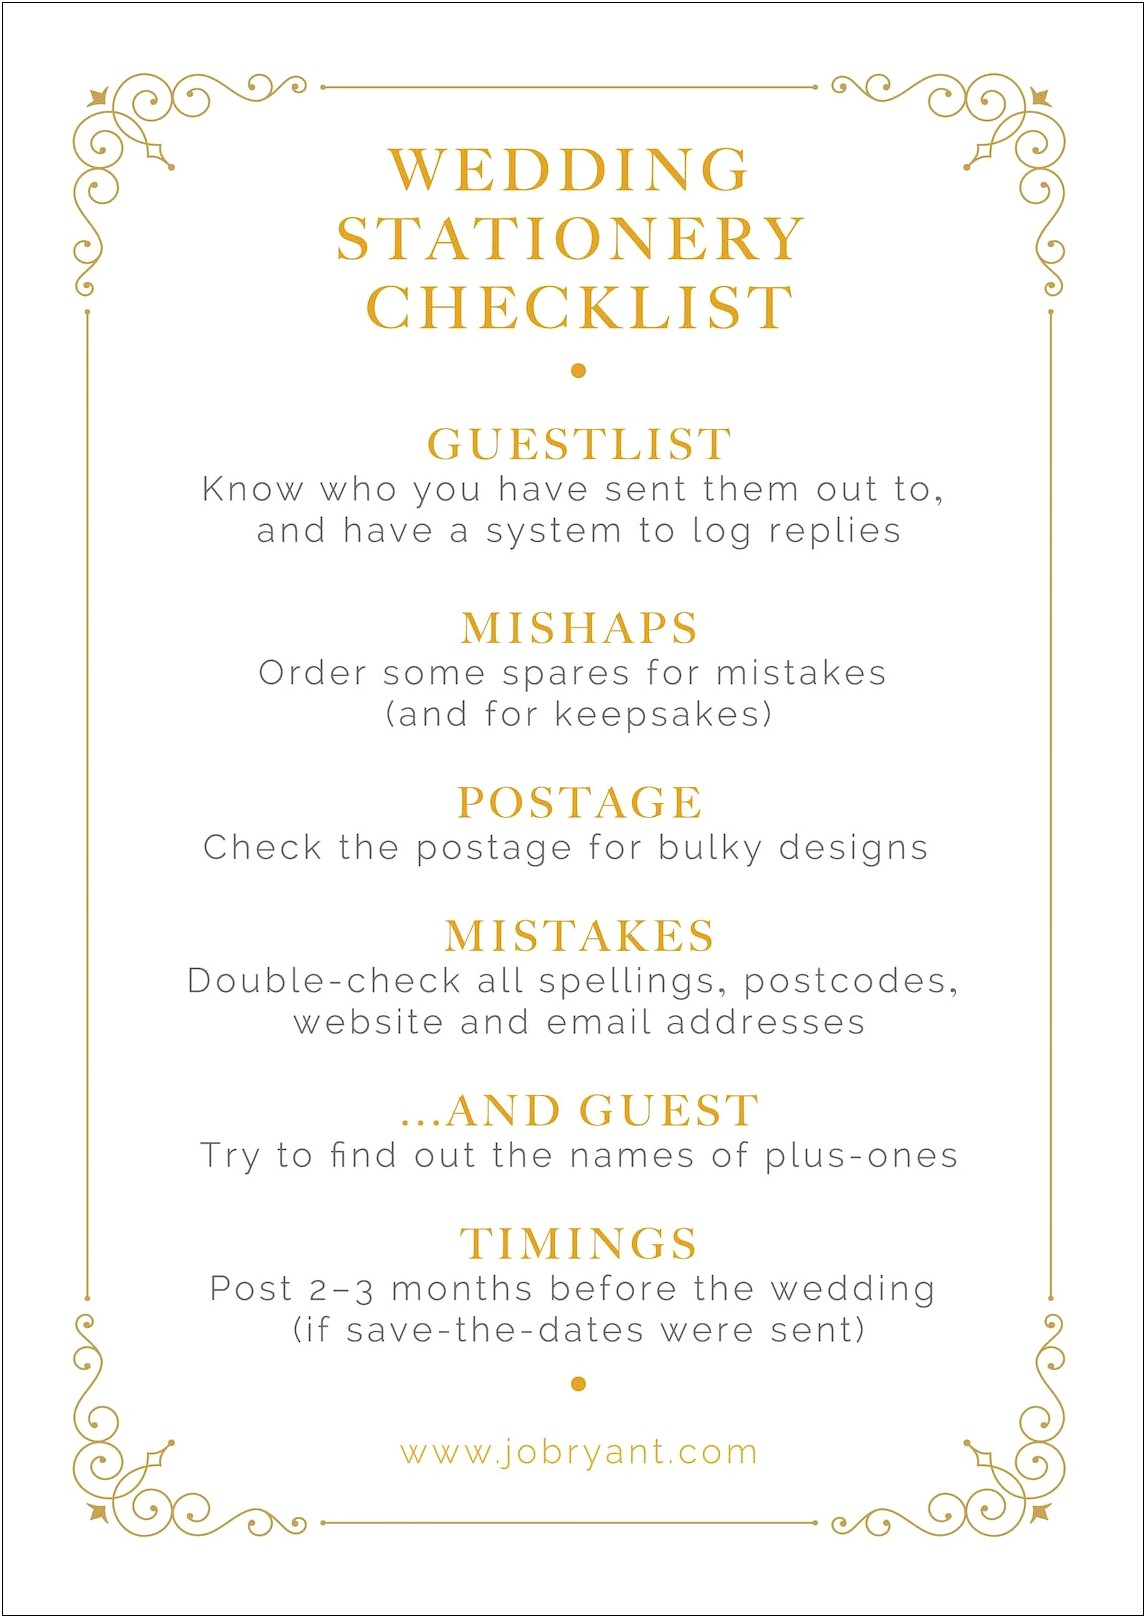 Proper Etiquette For Inviting Wedding Guests